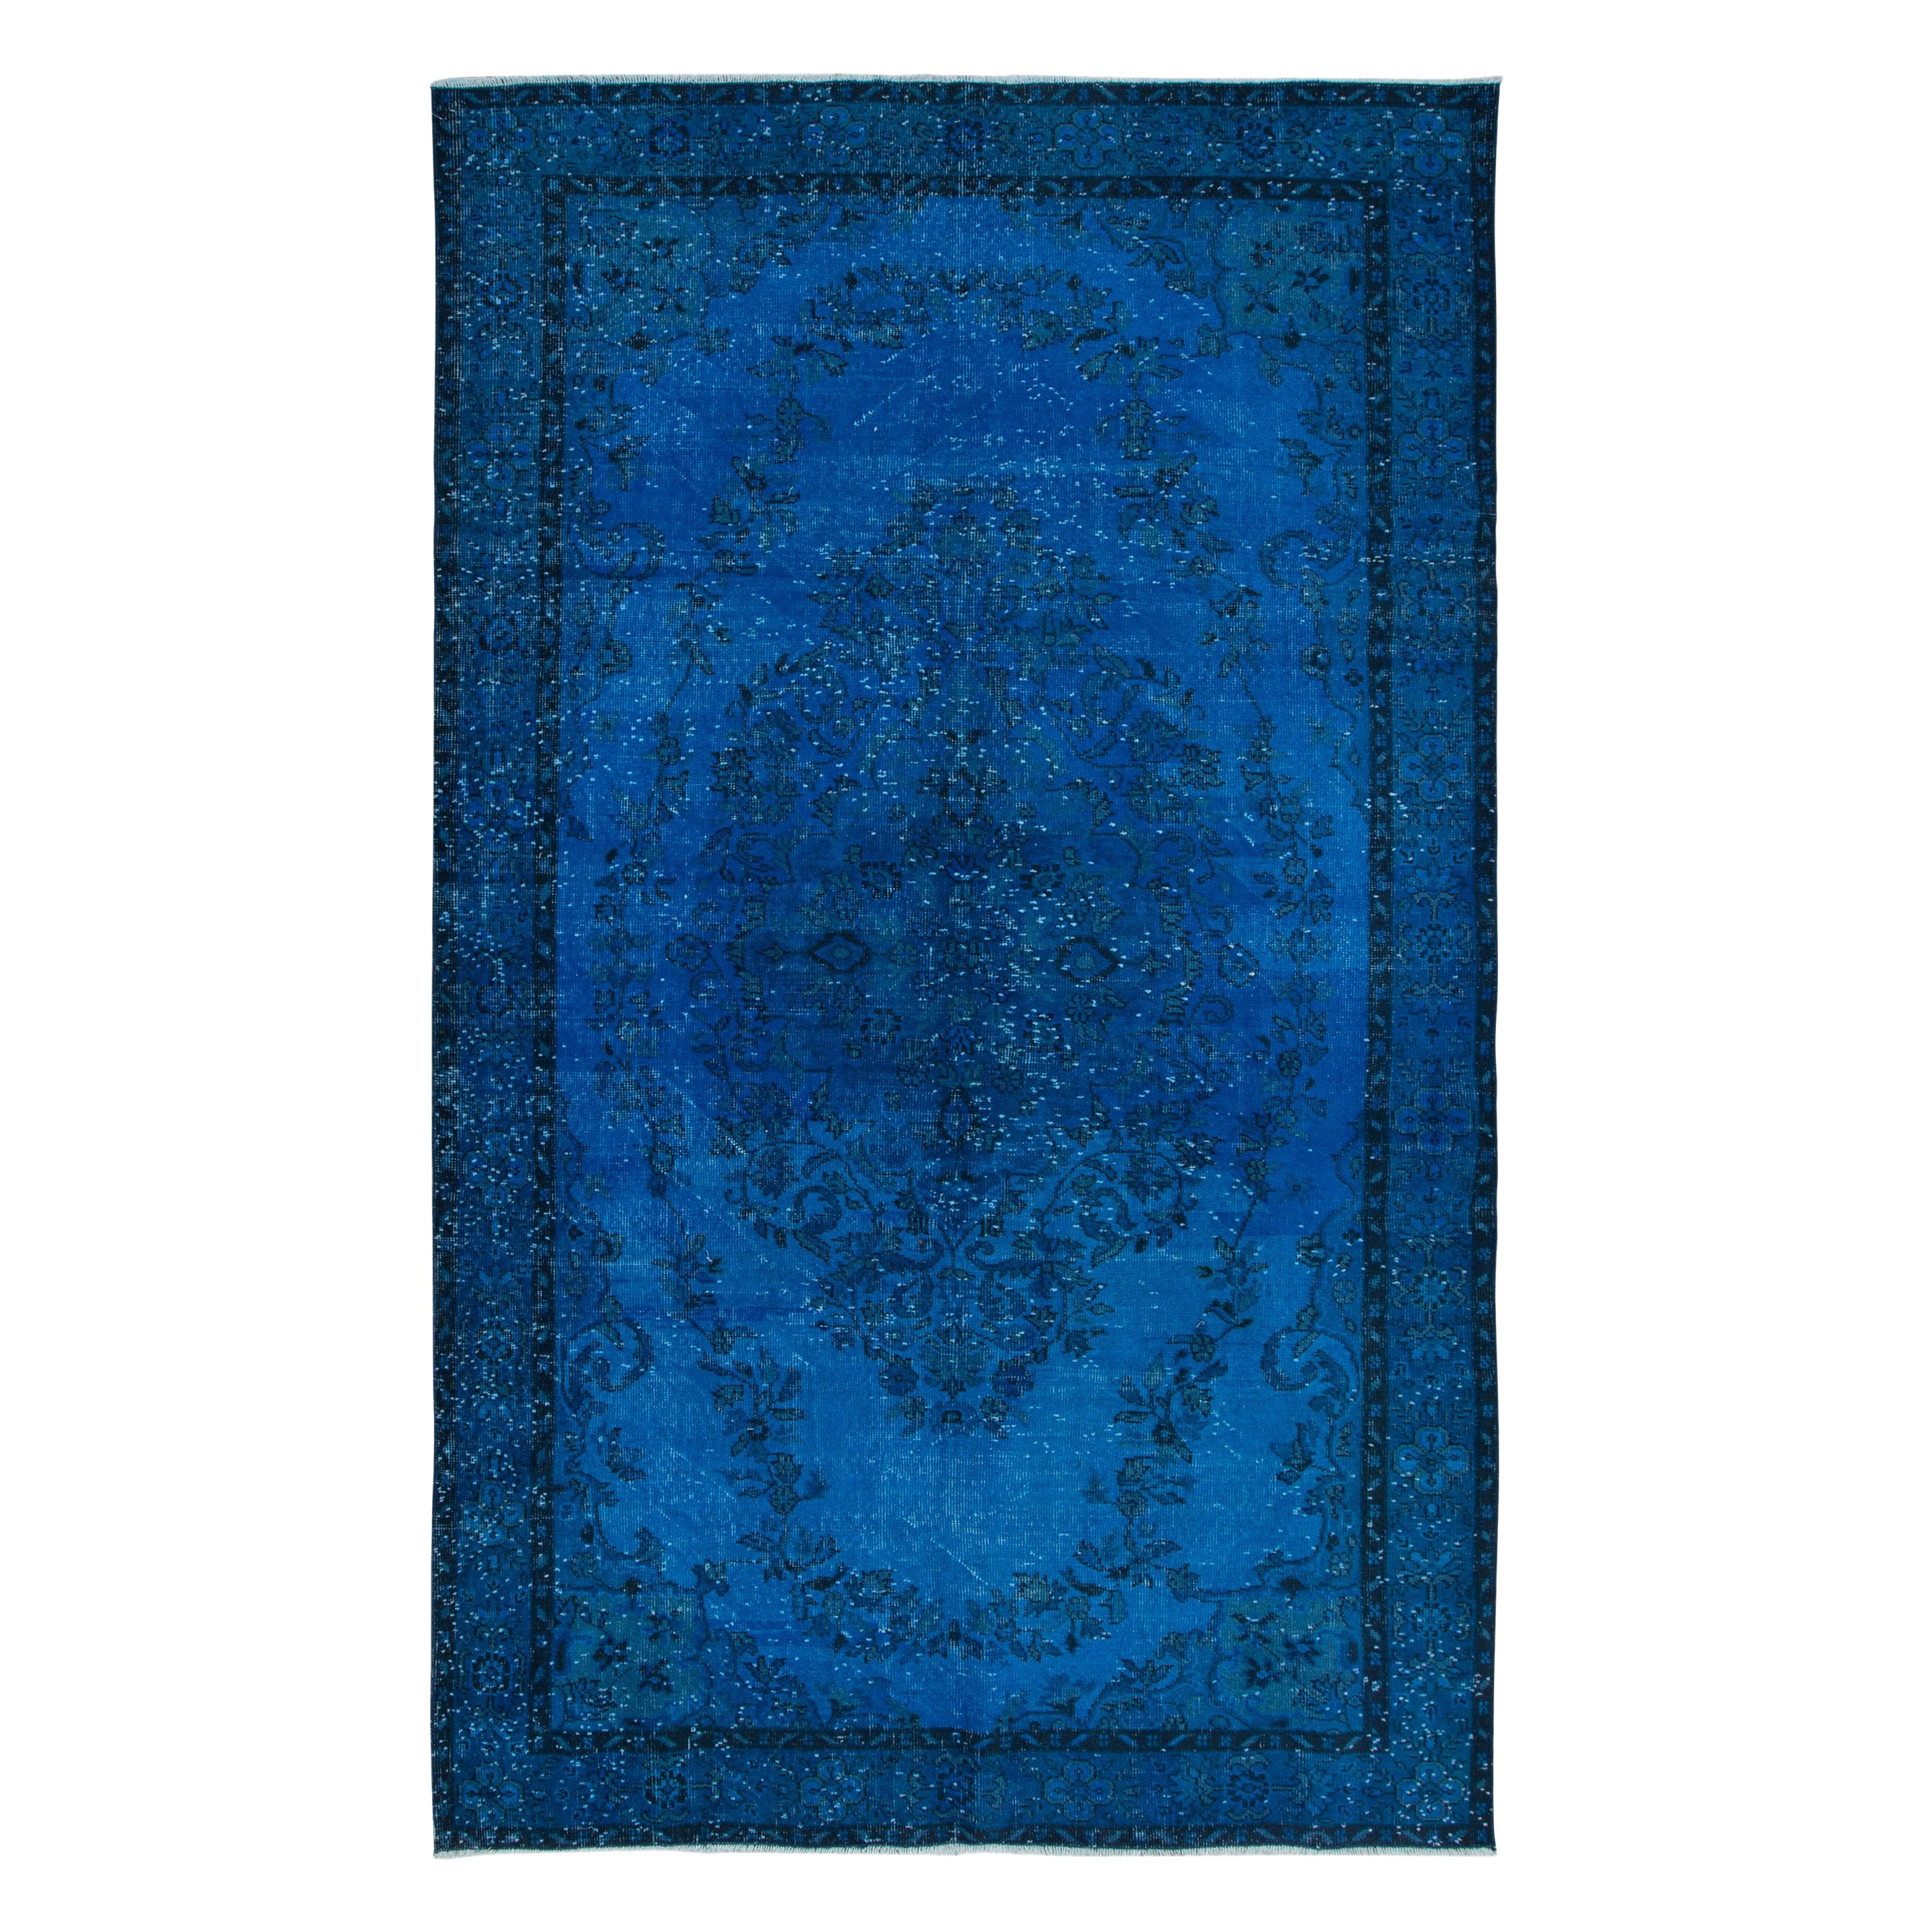 6.2x10.2 Ft Contemporary Blue Area Rug, Handwoven and Handknotted in Turkey